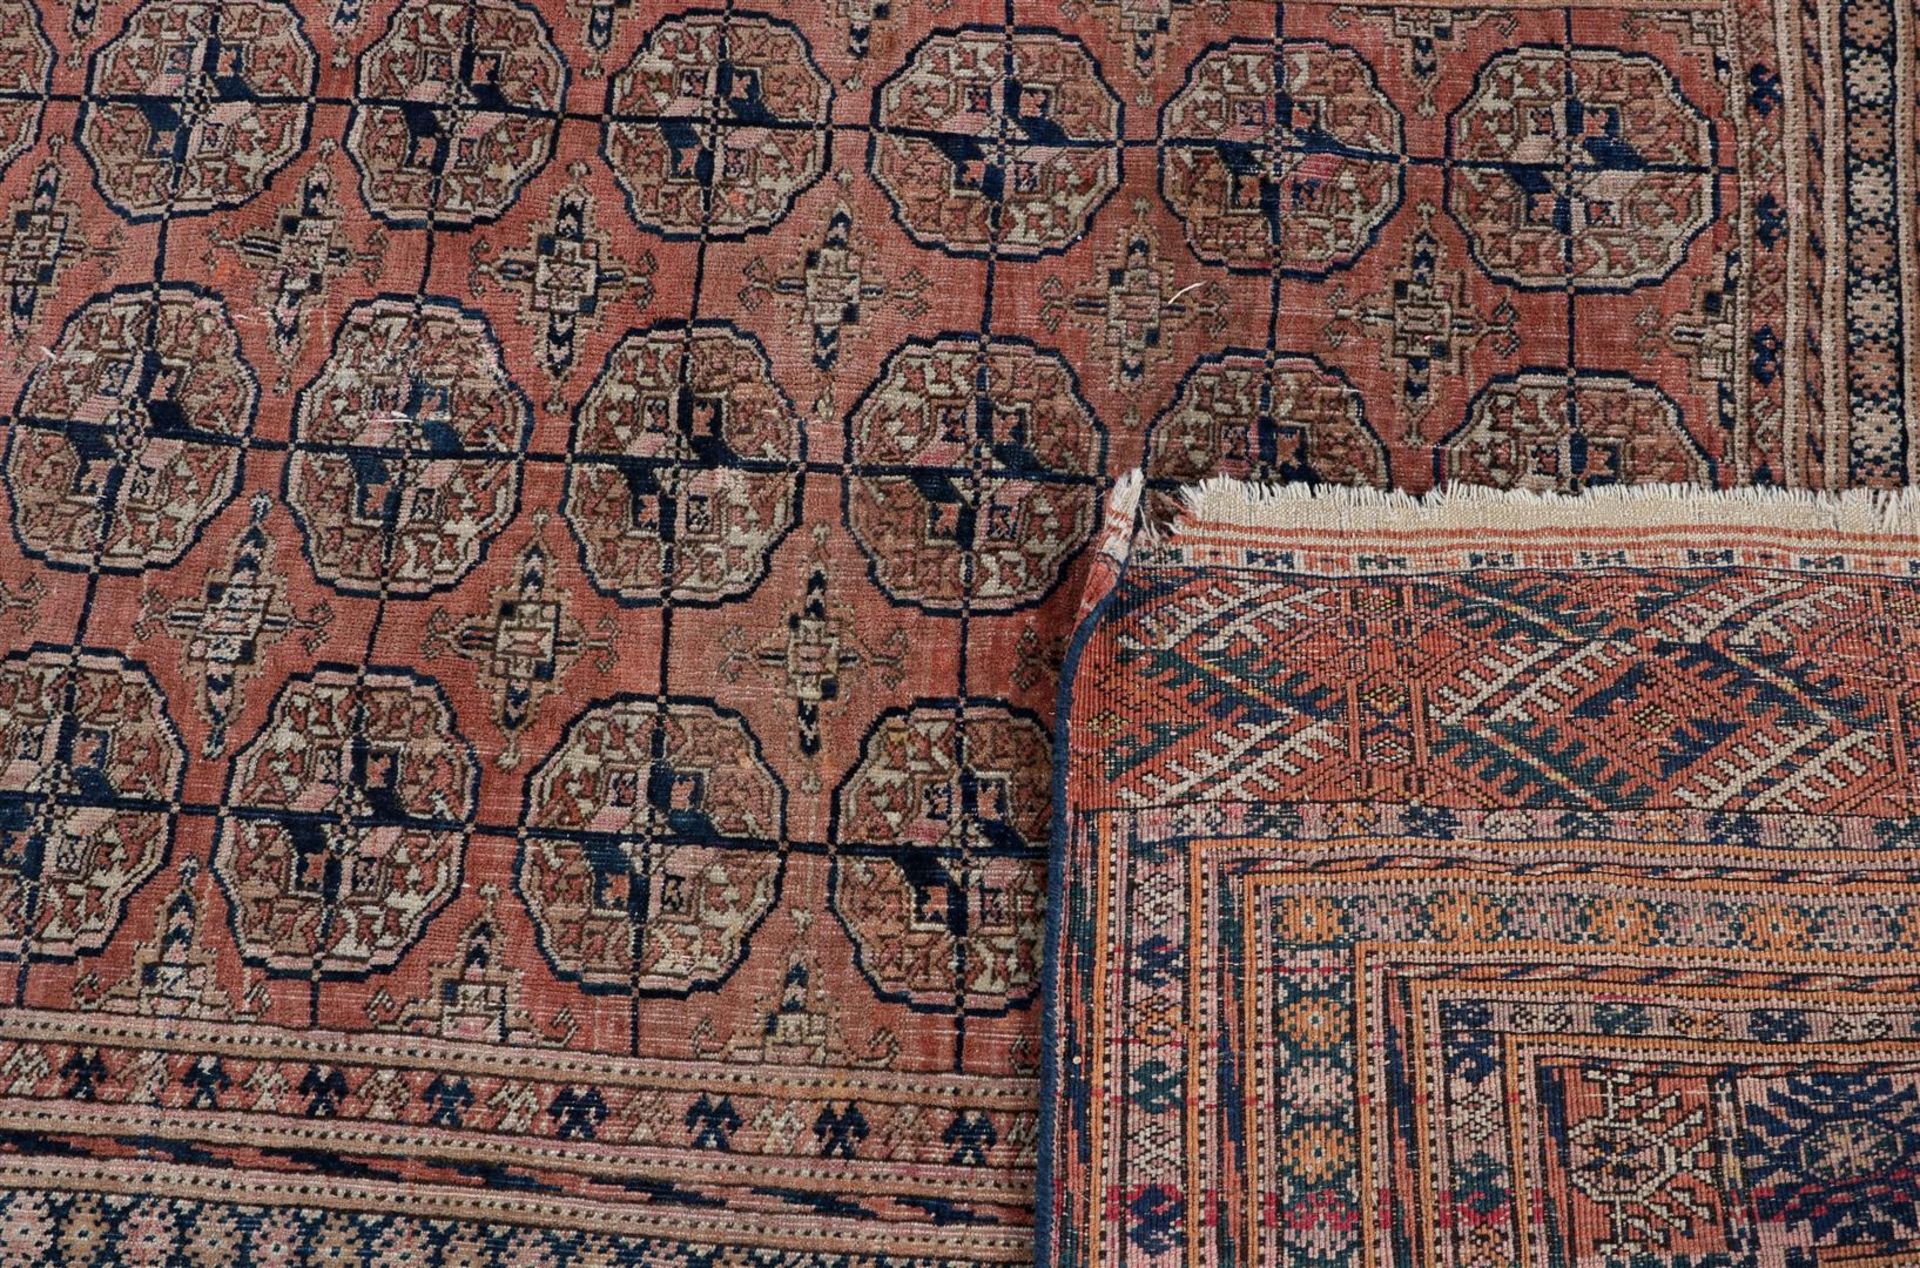 Bochara hand-knotted carpet - Image 2 of 3